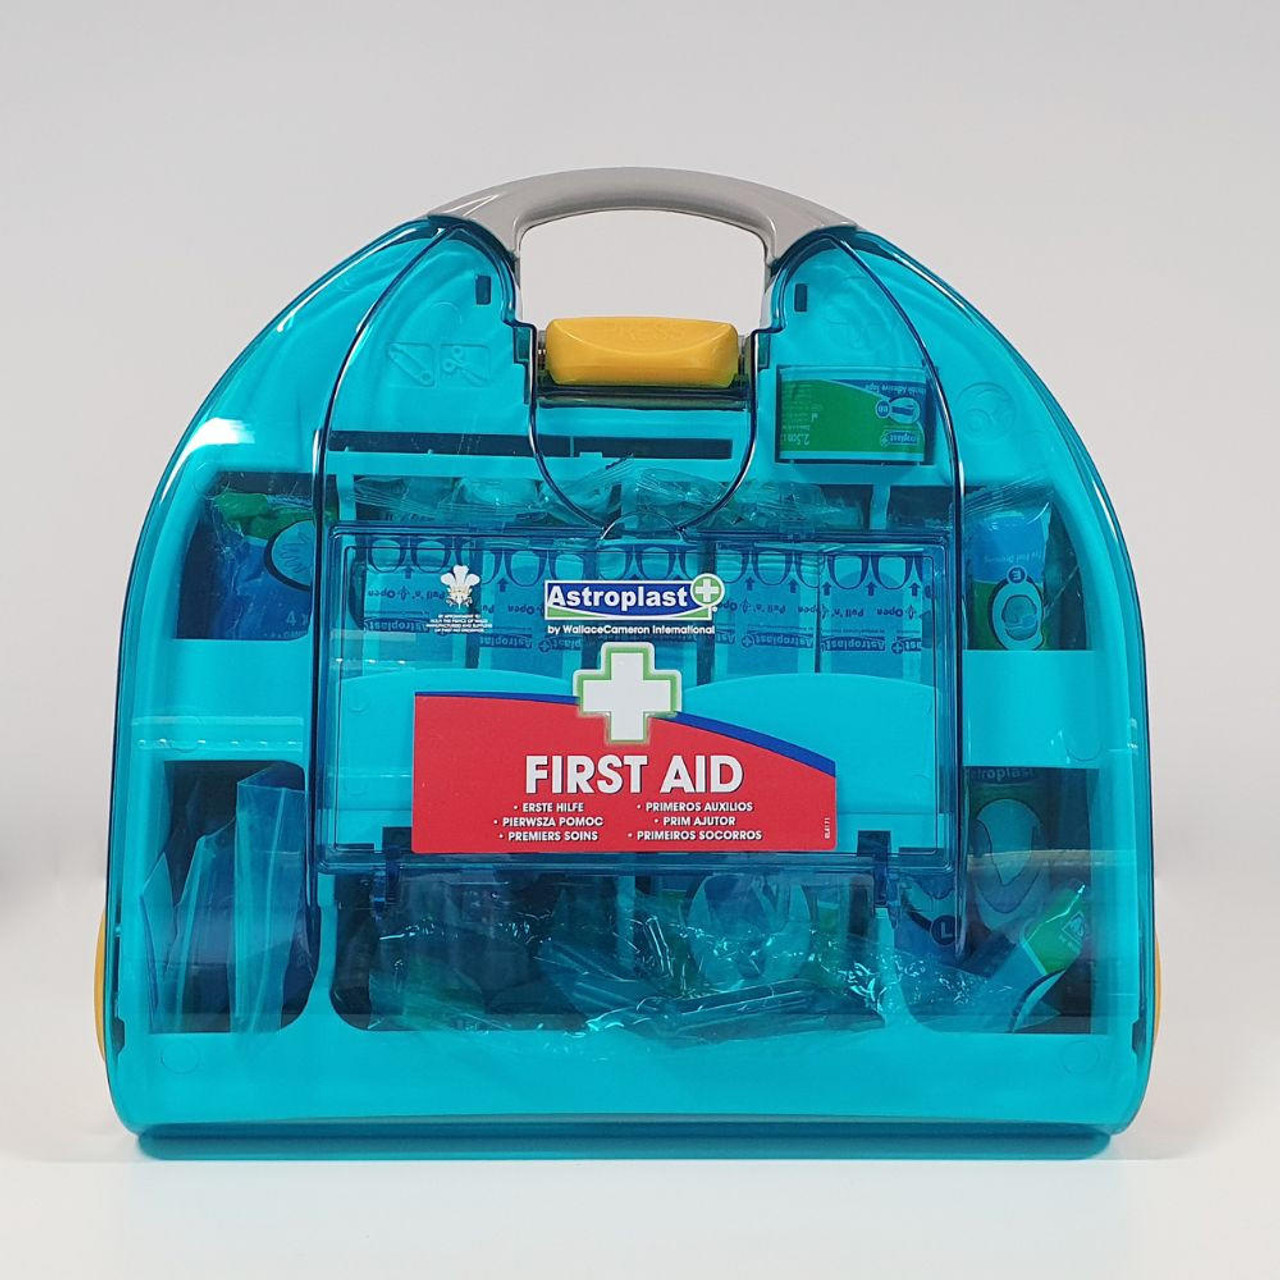 FAK1030 Astroplast HSE up to 10 Person First-Aid Kit Complete with Plaster Dispenser Adulto   